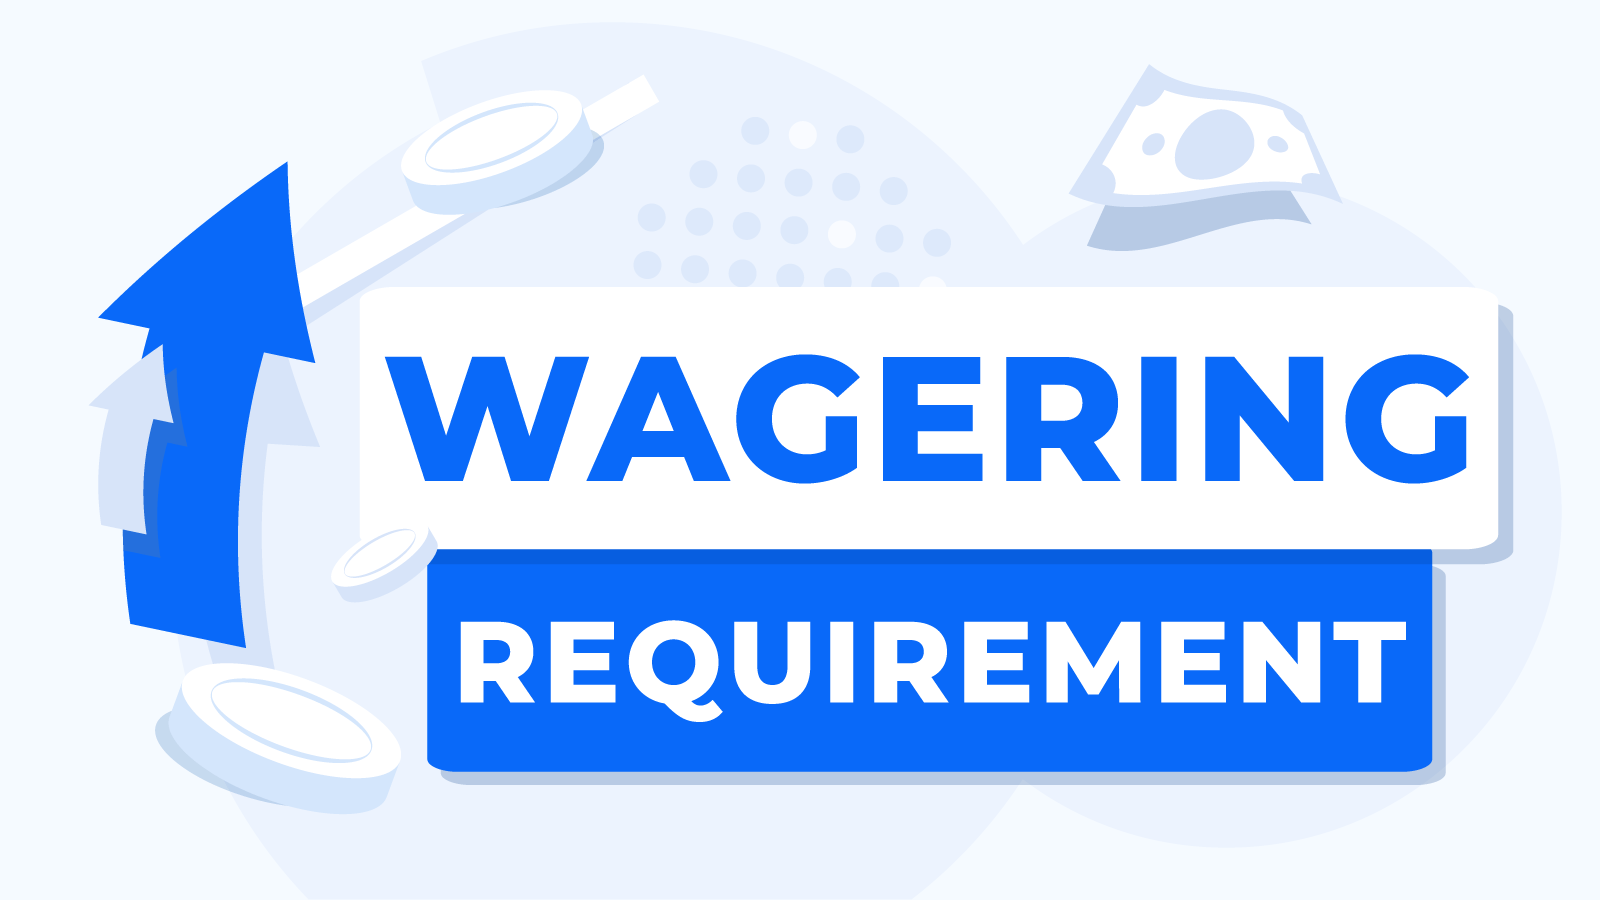 What is the wagering requirement?